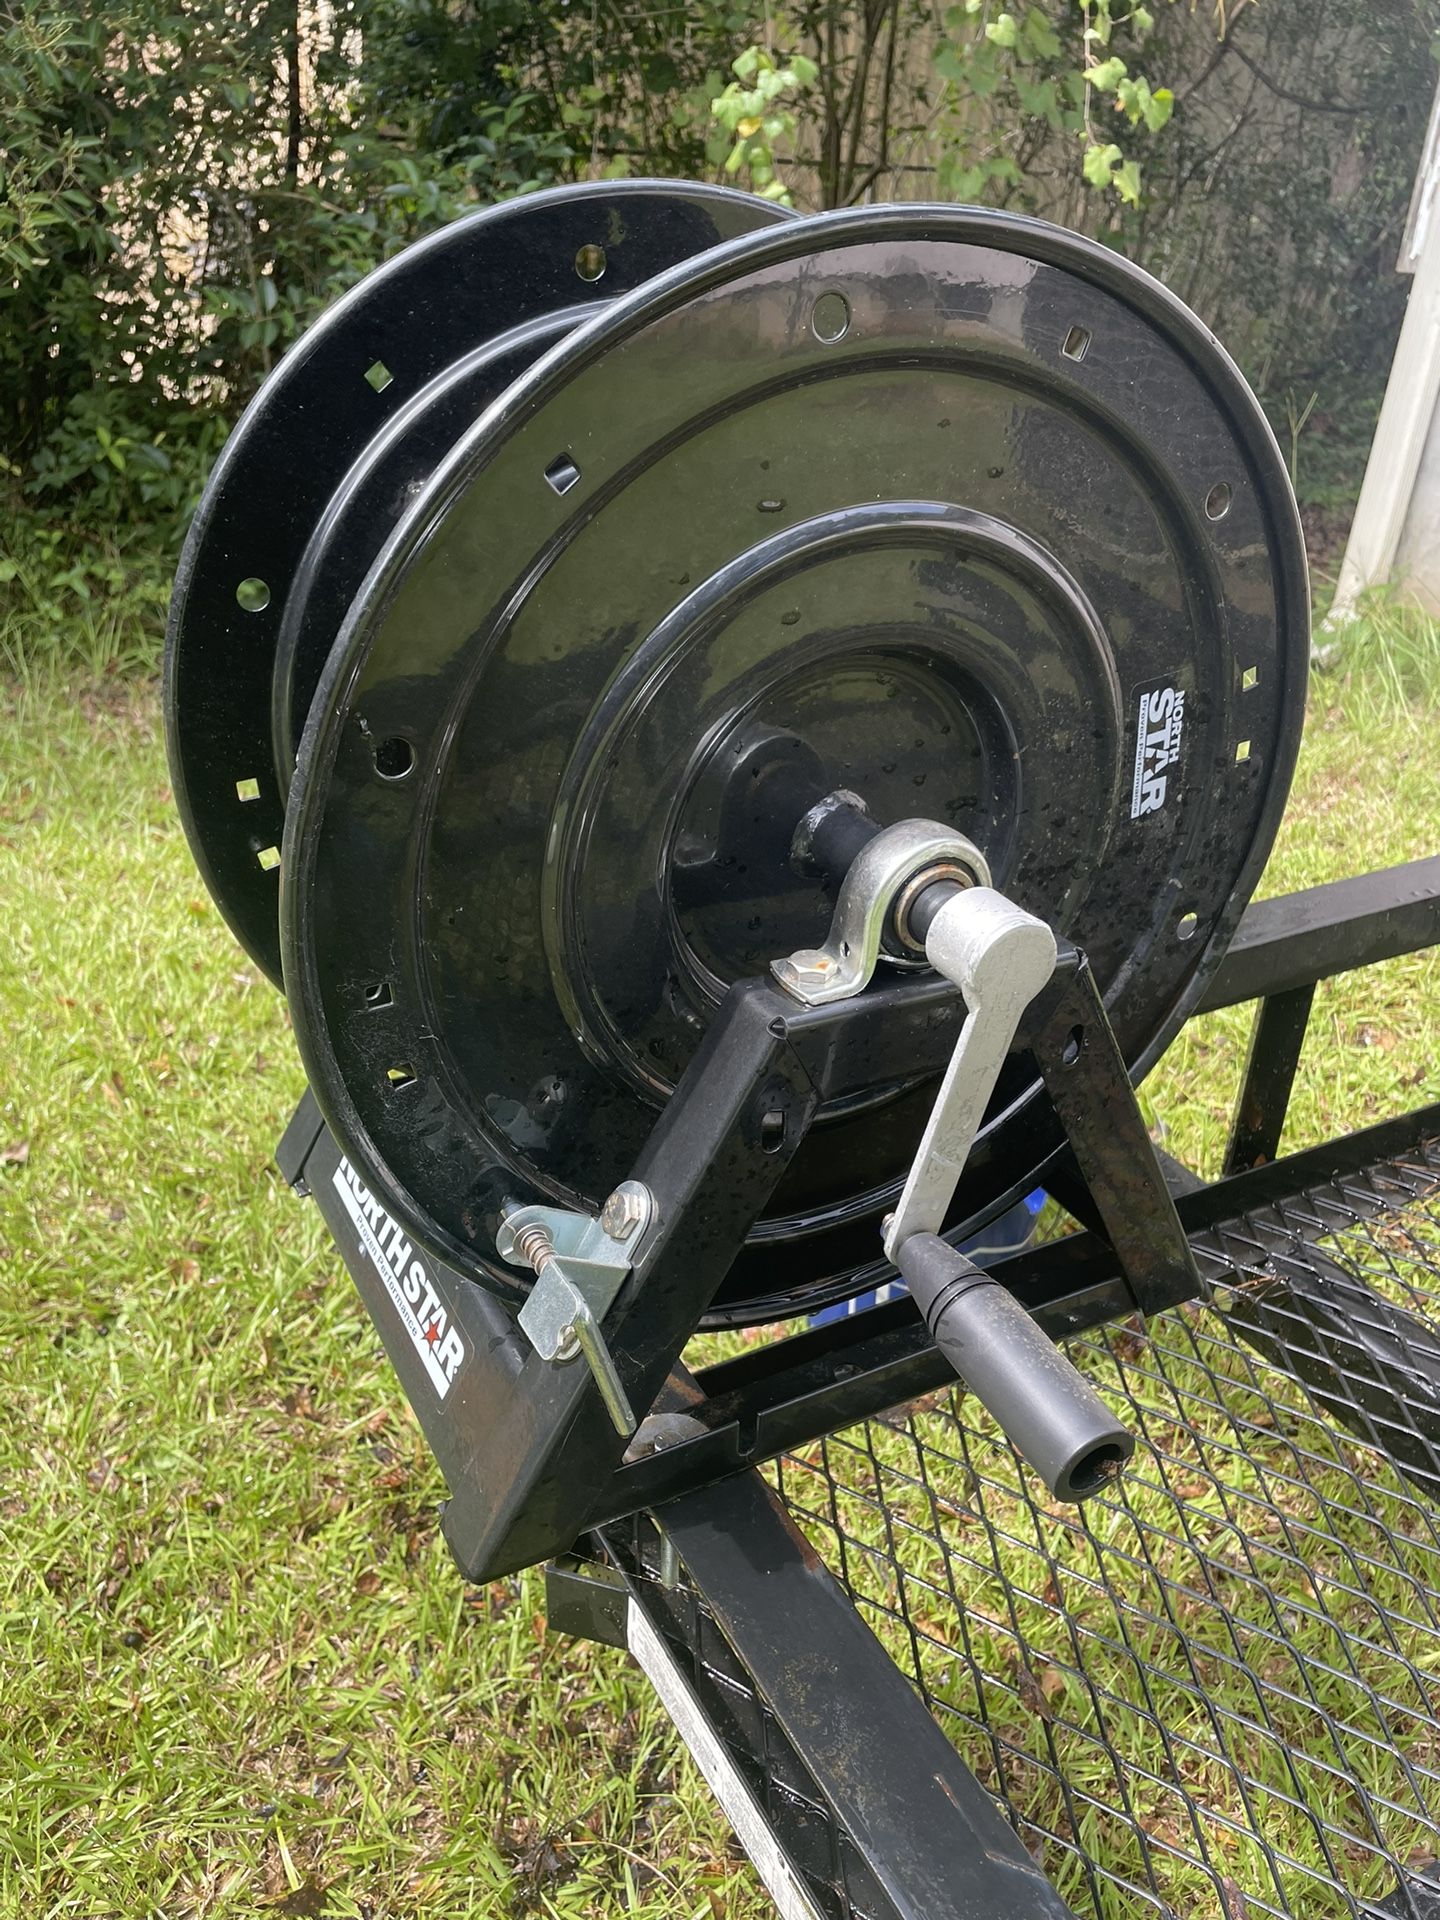 NorthStar Heavy Duty Hose Reel (5000 PSI) for Sale in Anderson, SC